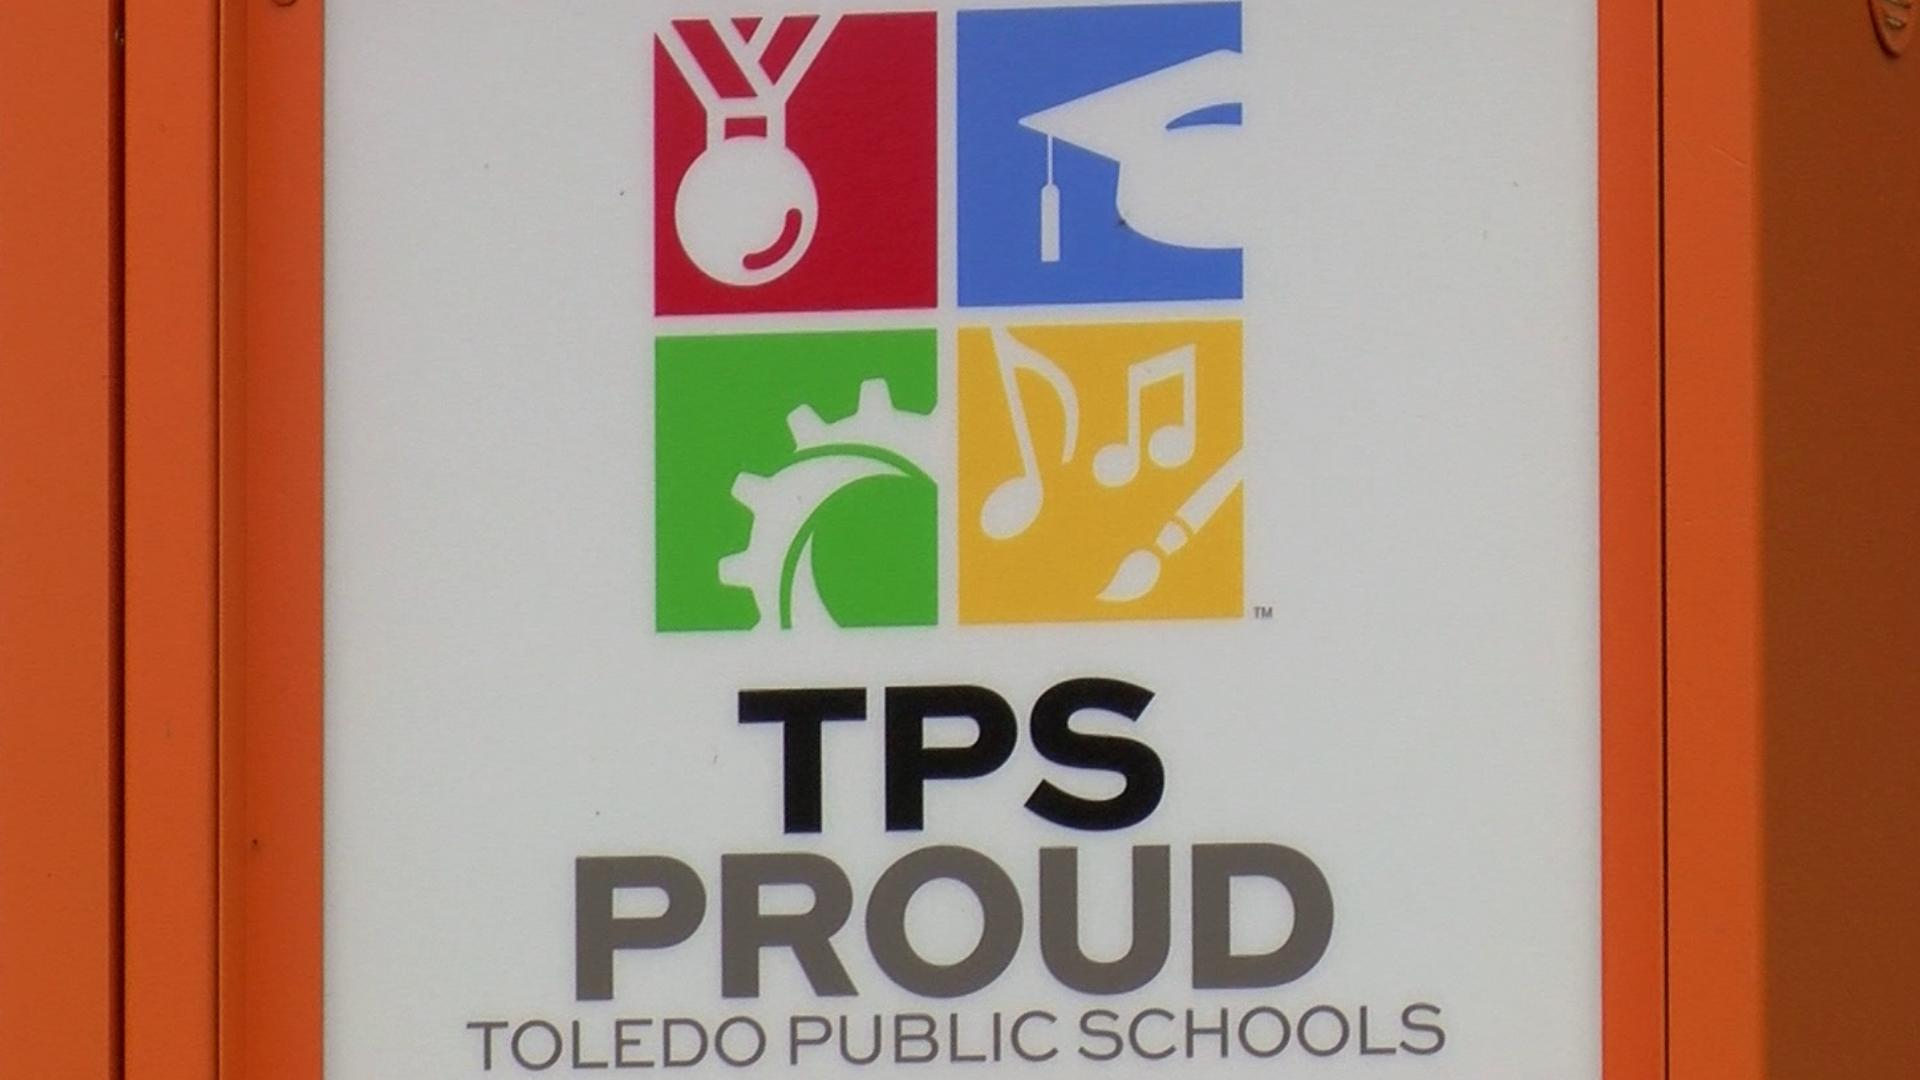 The lawsuits allege the school district violated multiple federal laws and demand a trial by jury. TPS in a statement said it cannot comment on pending litigation.